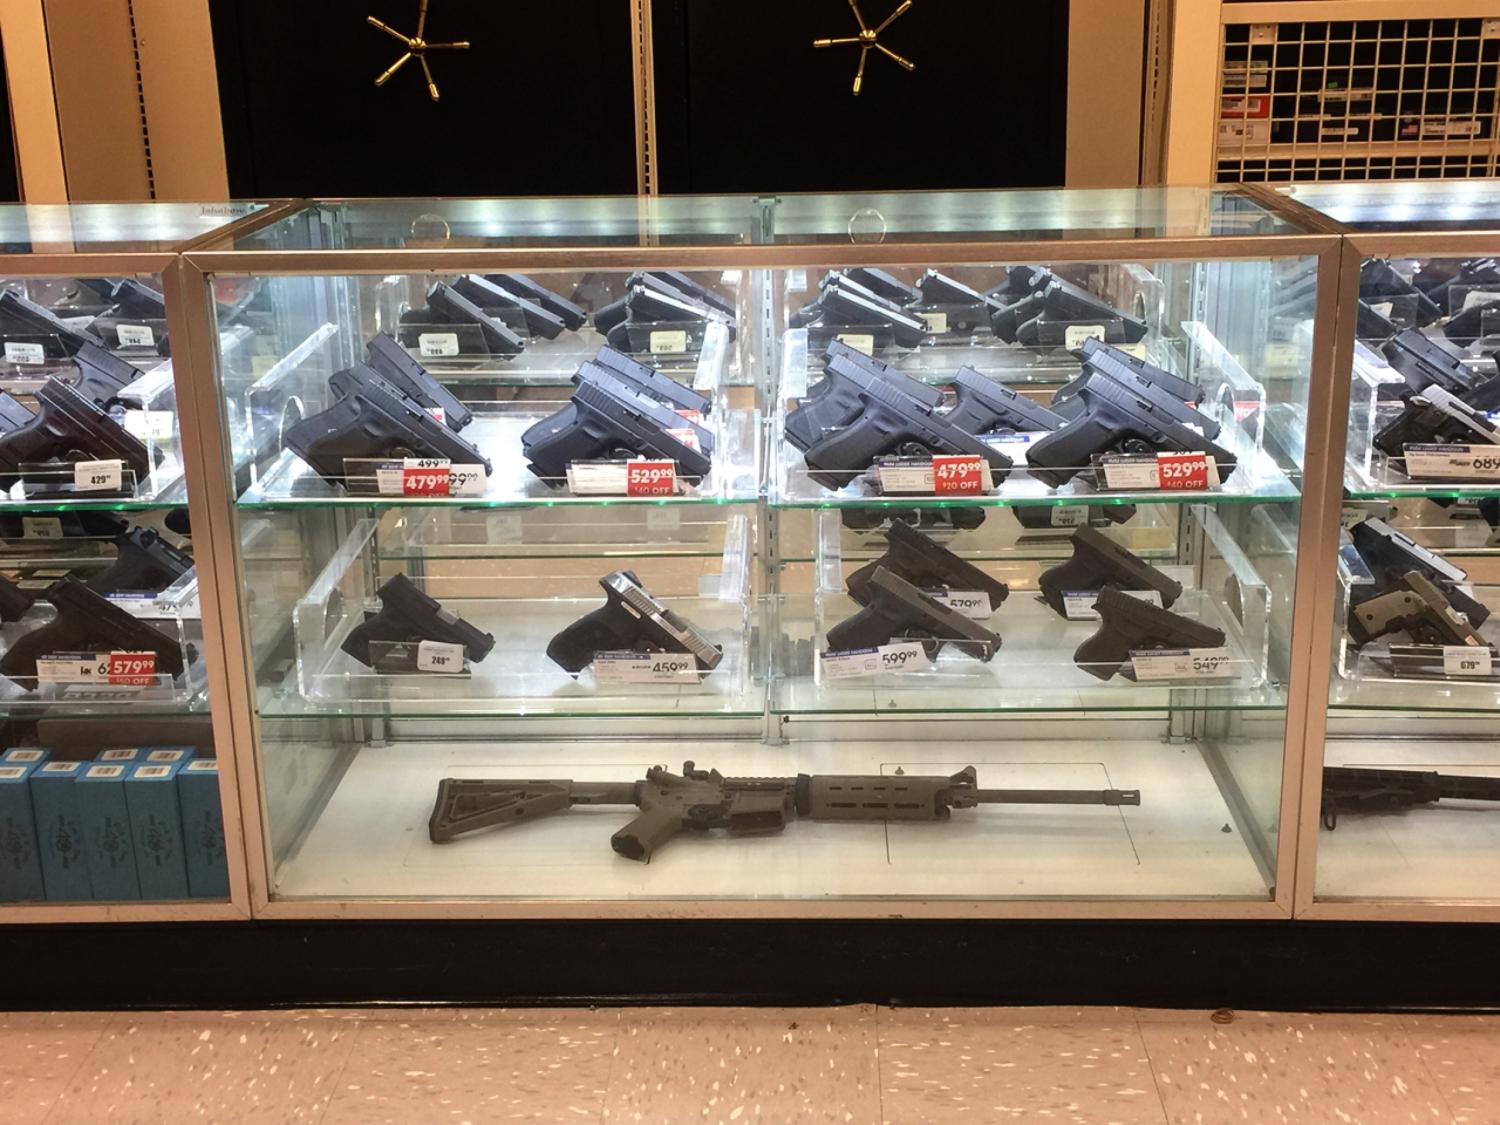 Display case filled with different types of guns for sale.